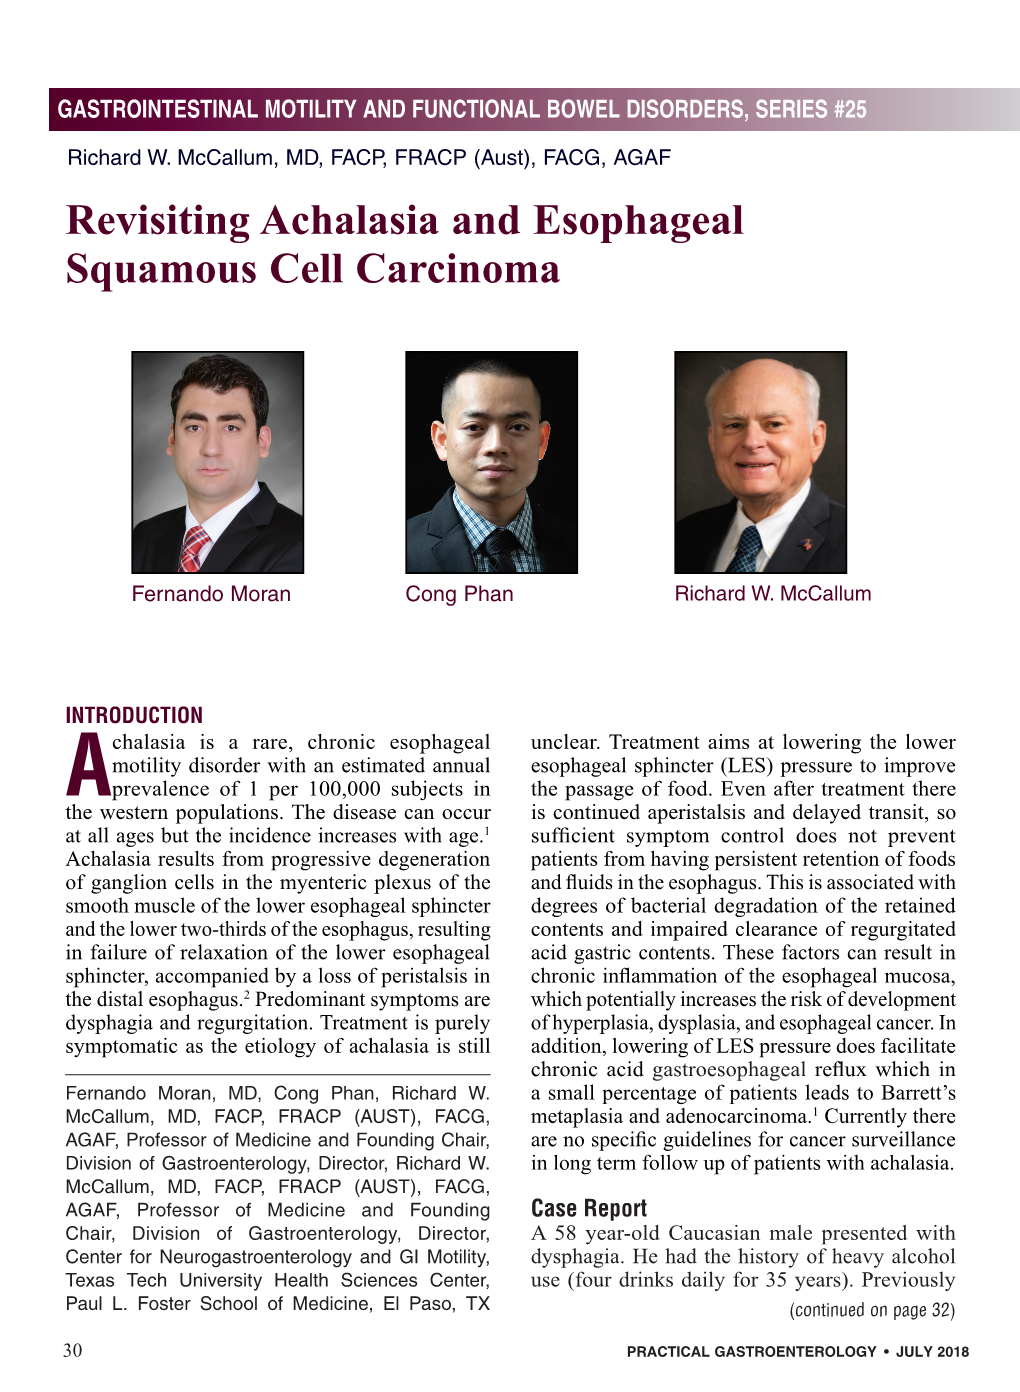 Revisiting Achalasia and Esophageal Squamous Cell Carcinoma